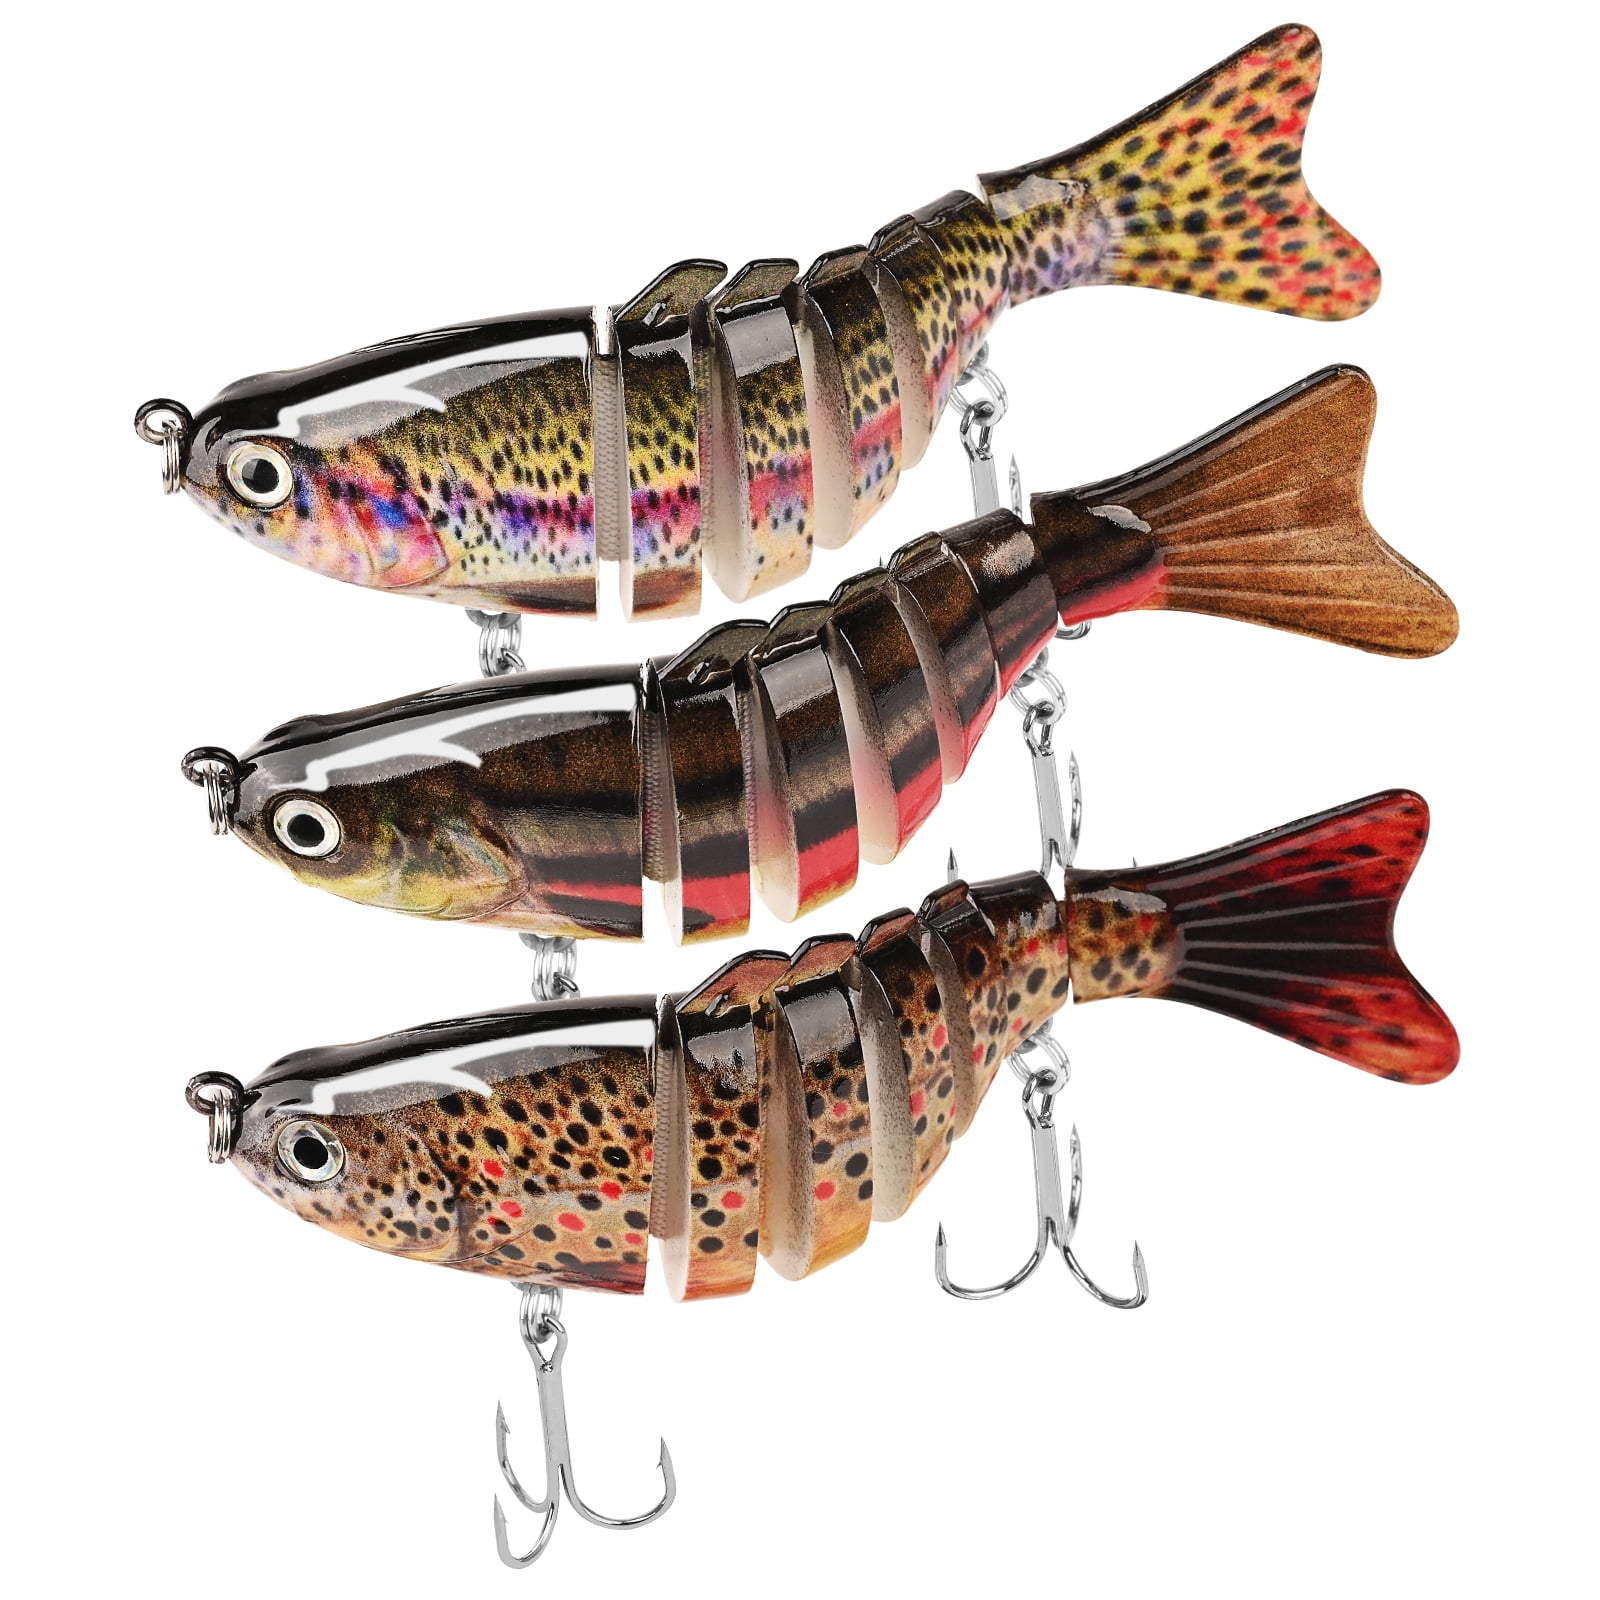  Flbirret 2Pcs Hard Bait Fish Lure Set - Lifelike Swimming  Posture with Treble Hook for Corrosion Resistant Fishing Tackle, Perfect  for Luring Fish and Attracting Attention : Sports & Outdoors